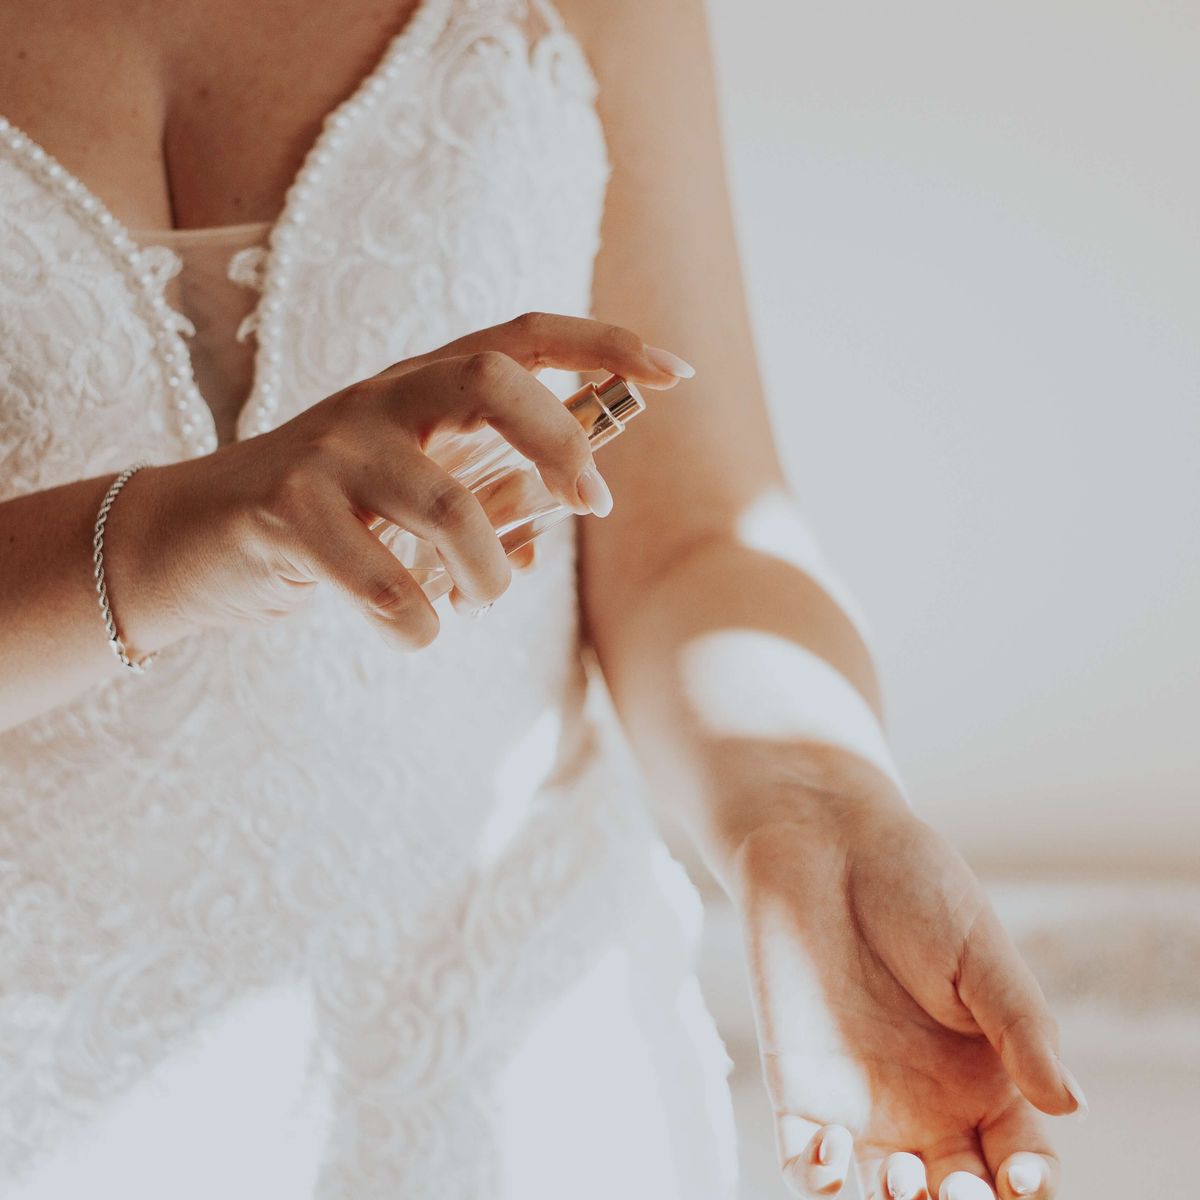 Wedding Perfume Guide: 21 of the Best Wedding Scents & Fragrances